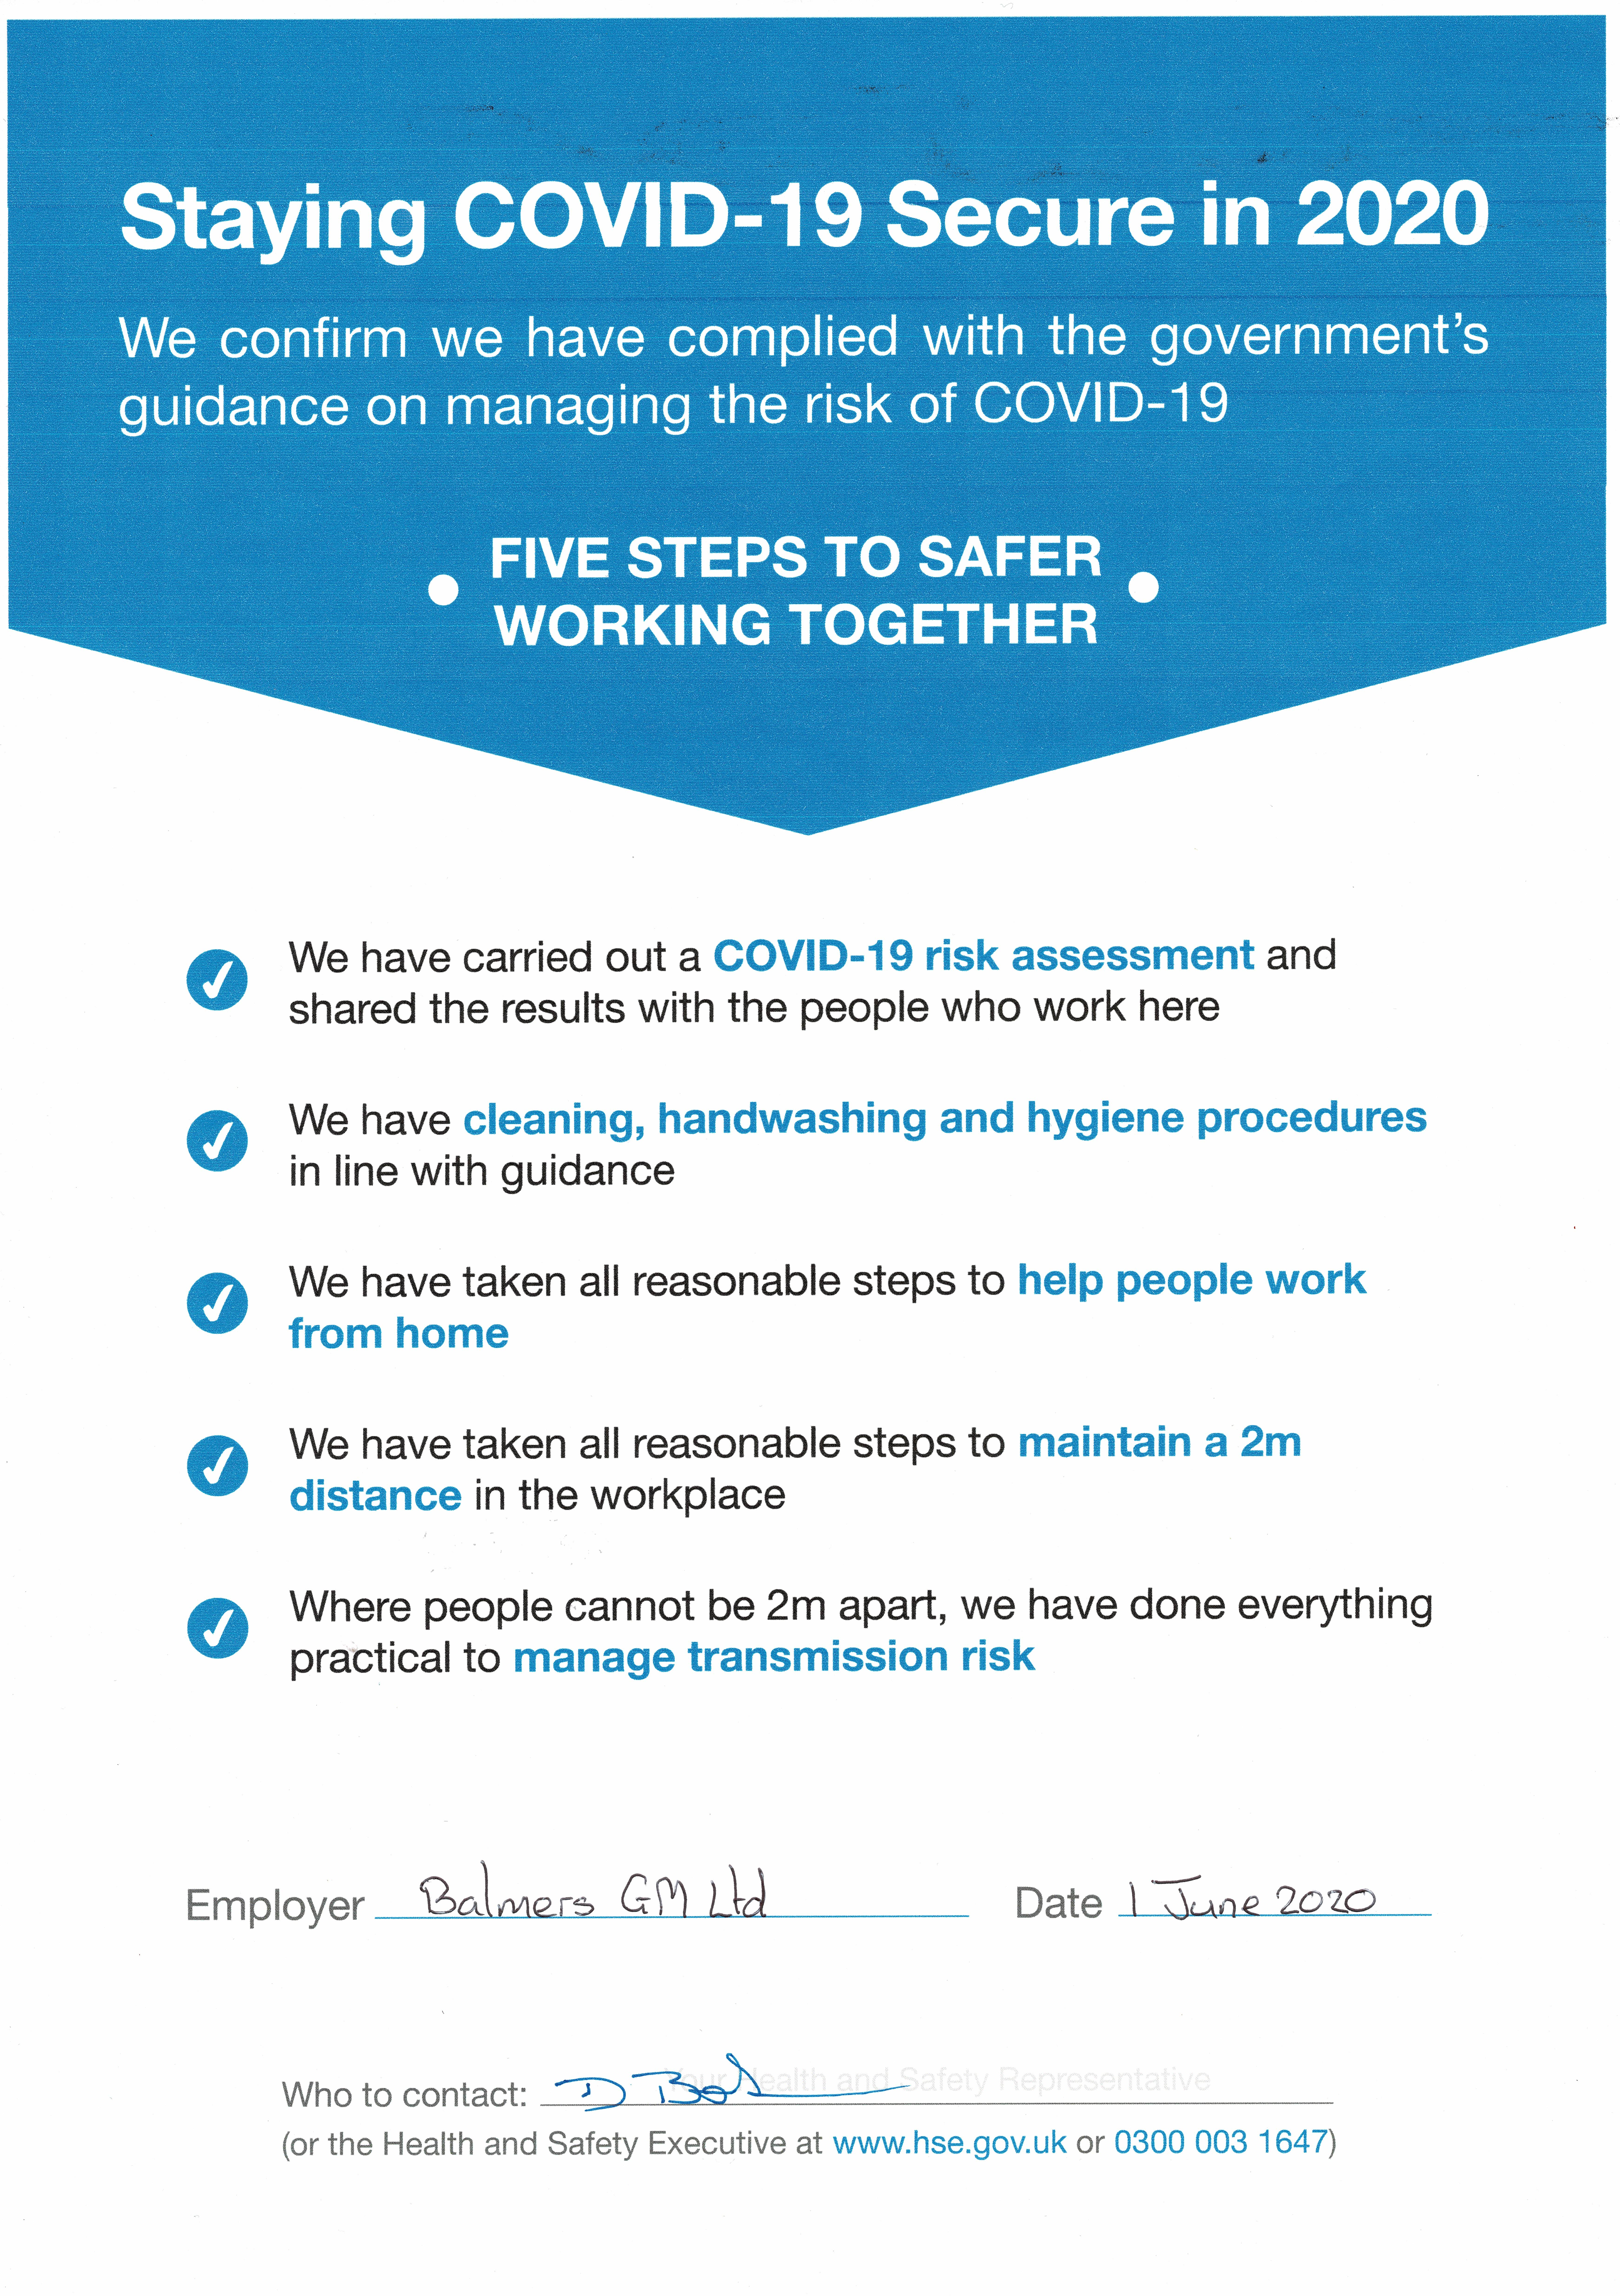 COVID-19 Secure document